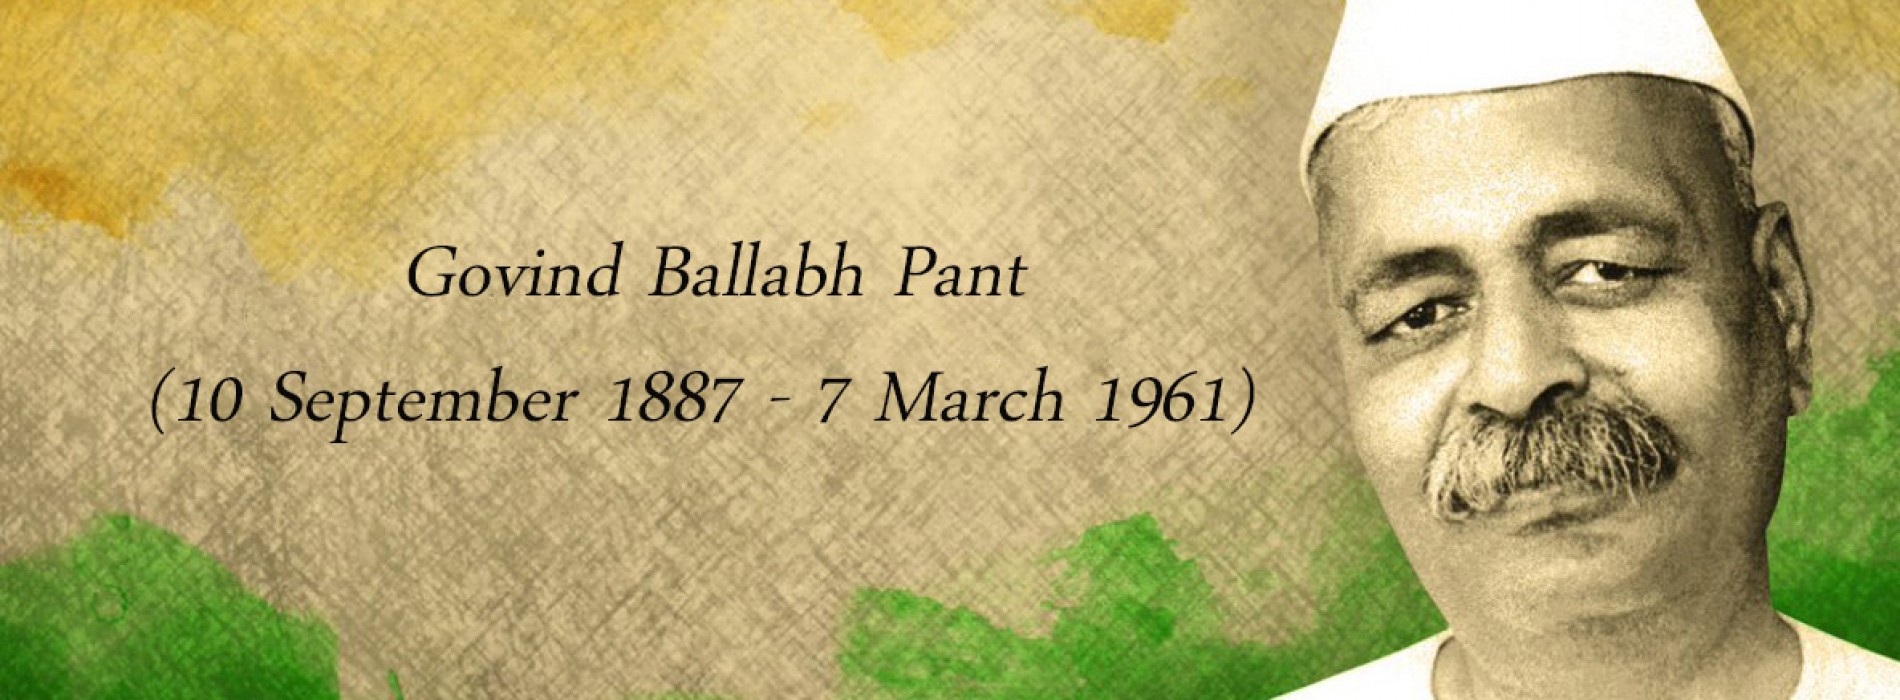 The meeting will be held on the birth anniversary of Govind Ballabh Pant